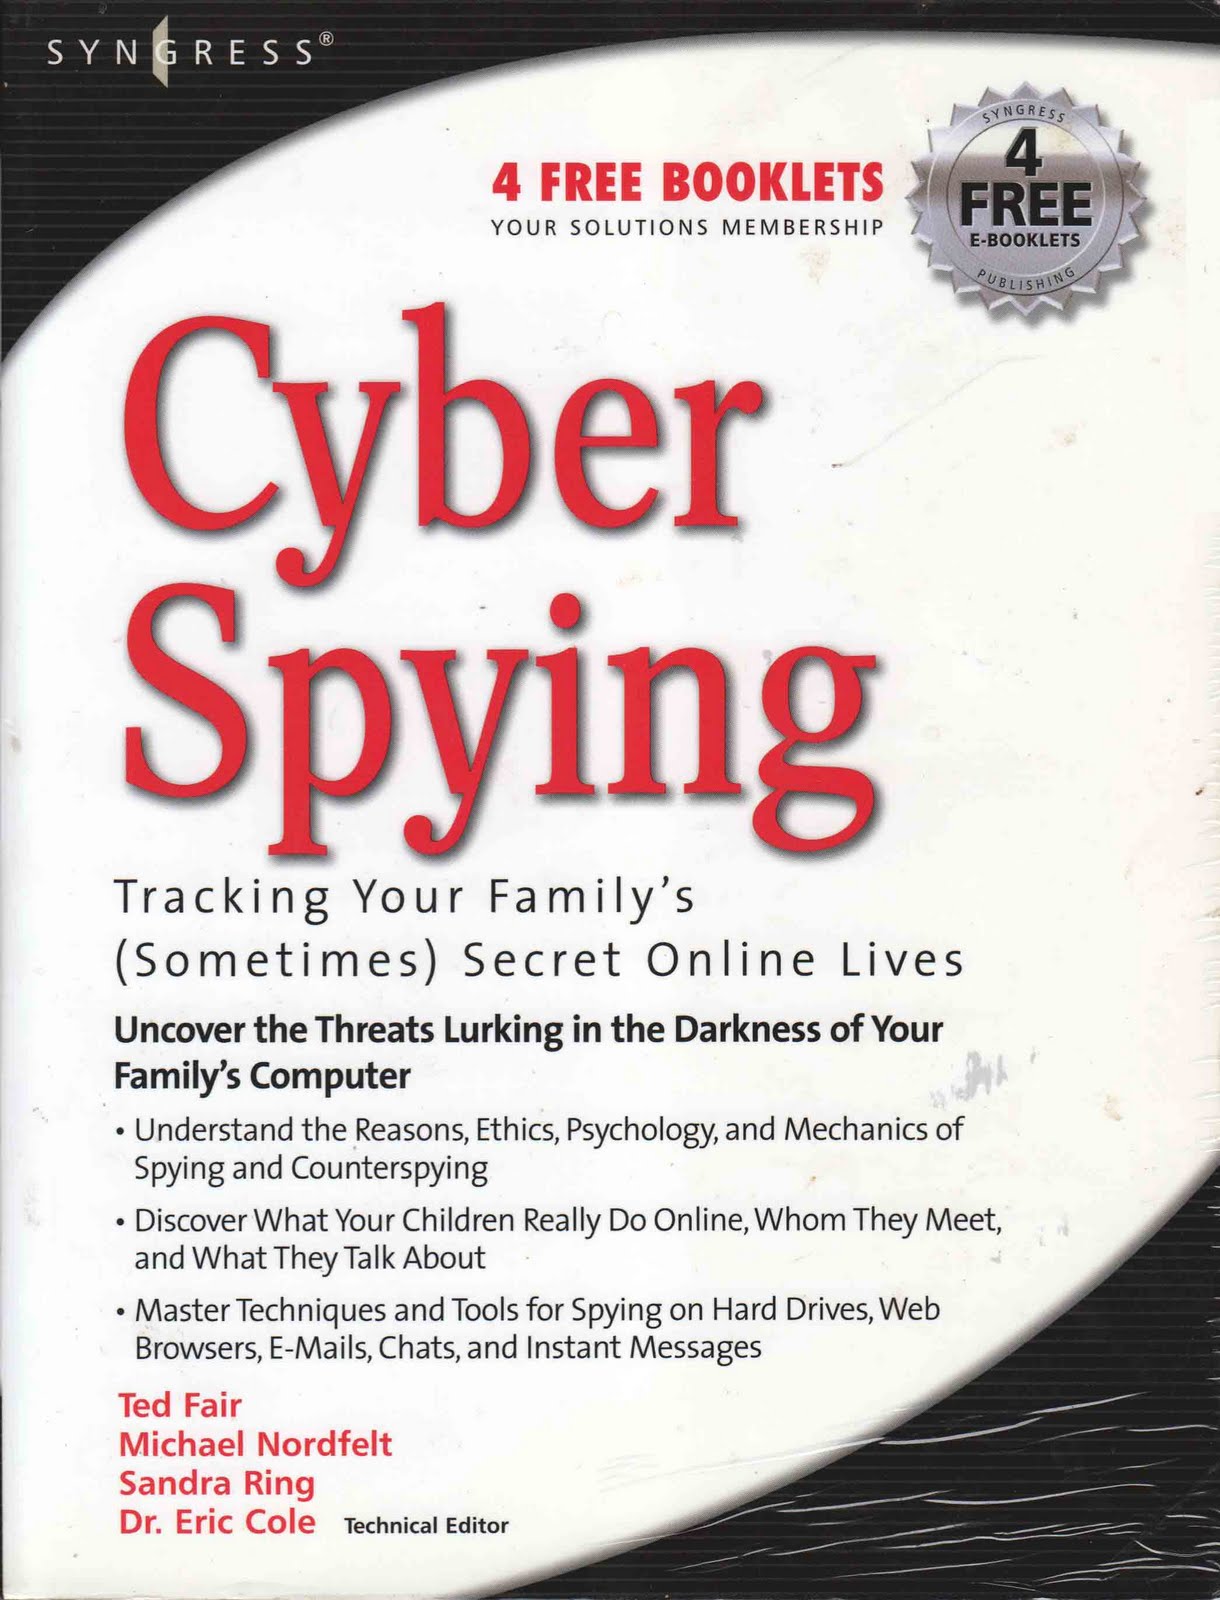 Cyber Spying Tracking Your Family's (Sometimes) Secret Online Lives Ted Fair, Michael Nordfelt, Sandra Ring and Dr. Eric Cole